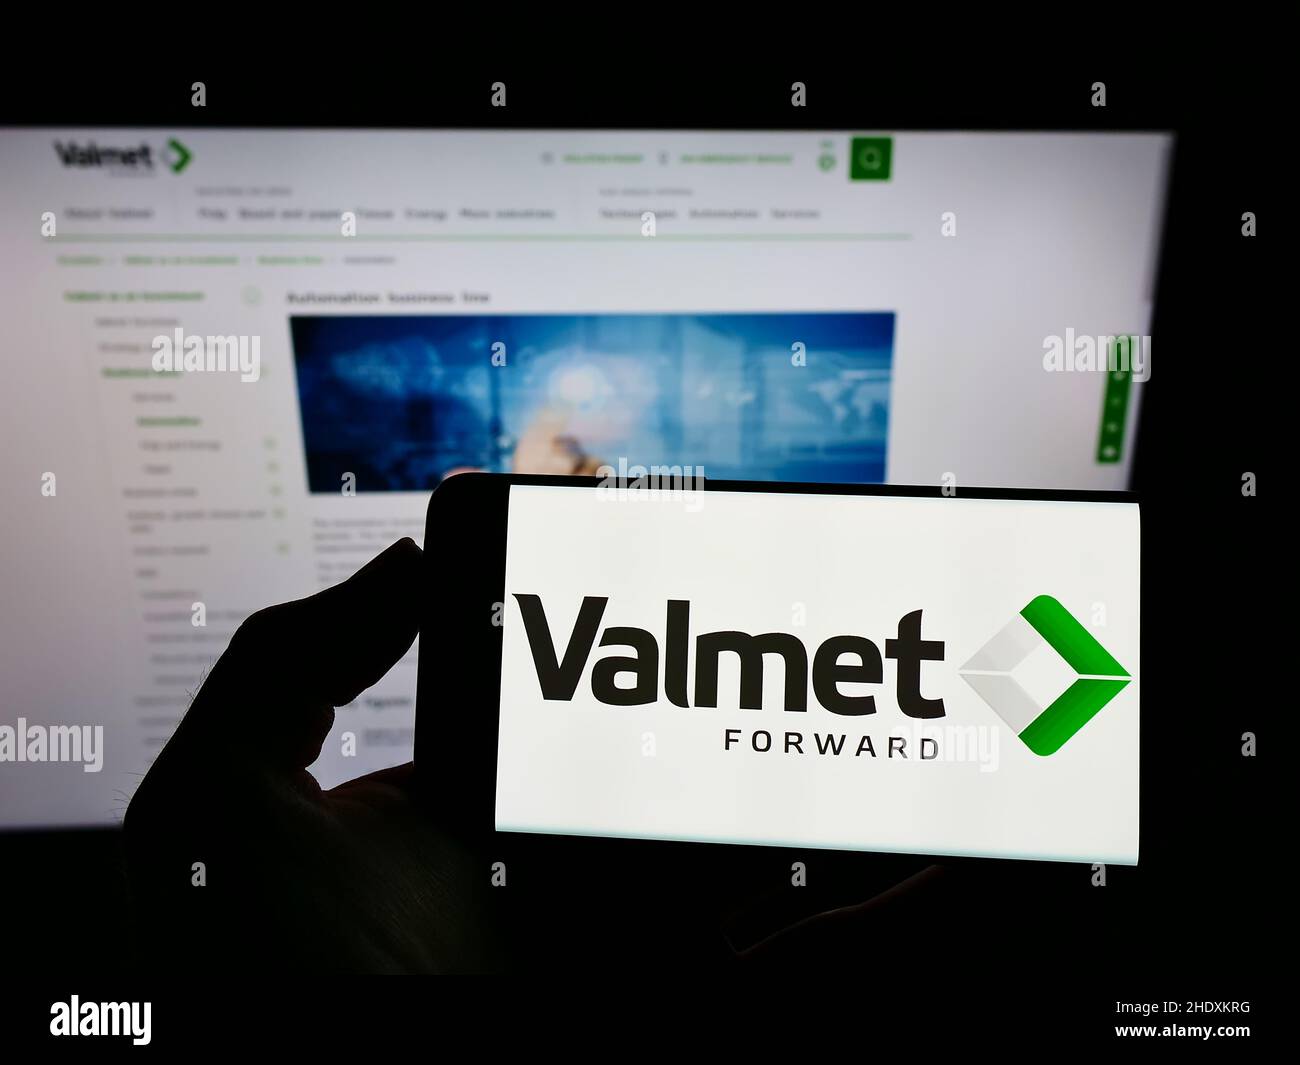 Person holding mobile phone with logo of Finnish engineering company Valmet Oyj on screen in front of business web page. Focus on phone display. Stock Photo